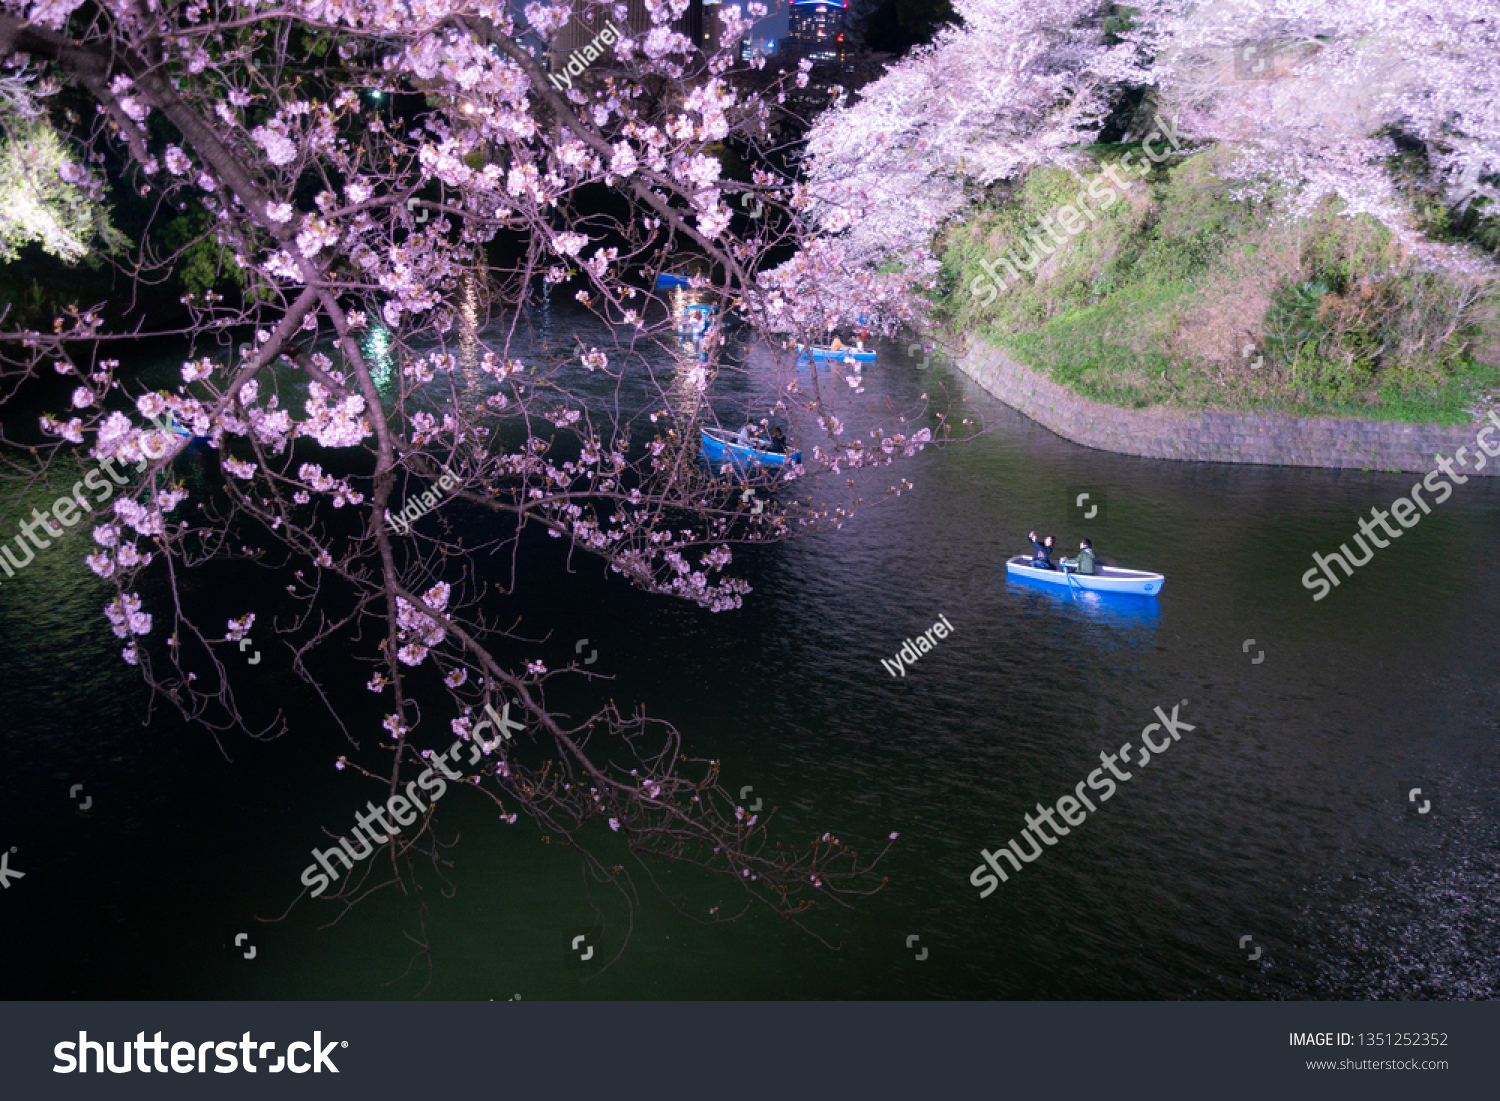 Sakura (cherry blossom) light up at famous outdoor park, Chidorigafuchi at Tokyo, Japan. Boat activity along the river is one of the popular leisure during this season. #1351252352